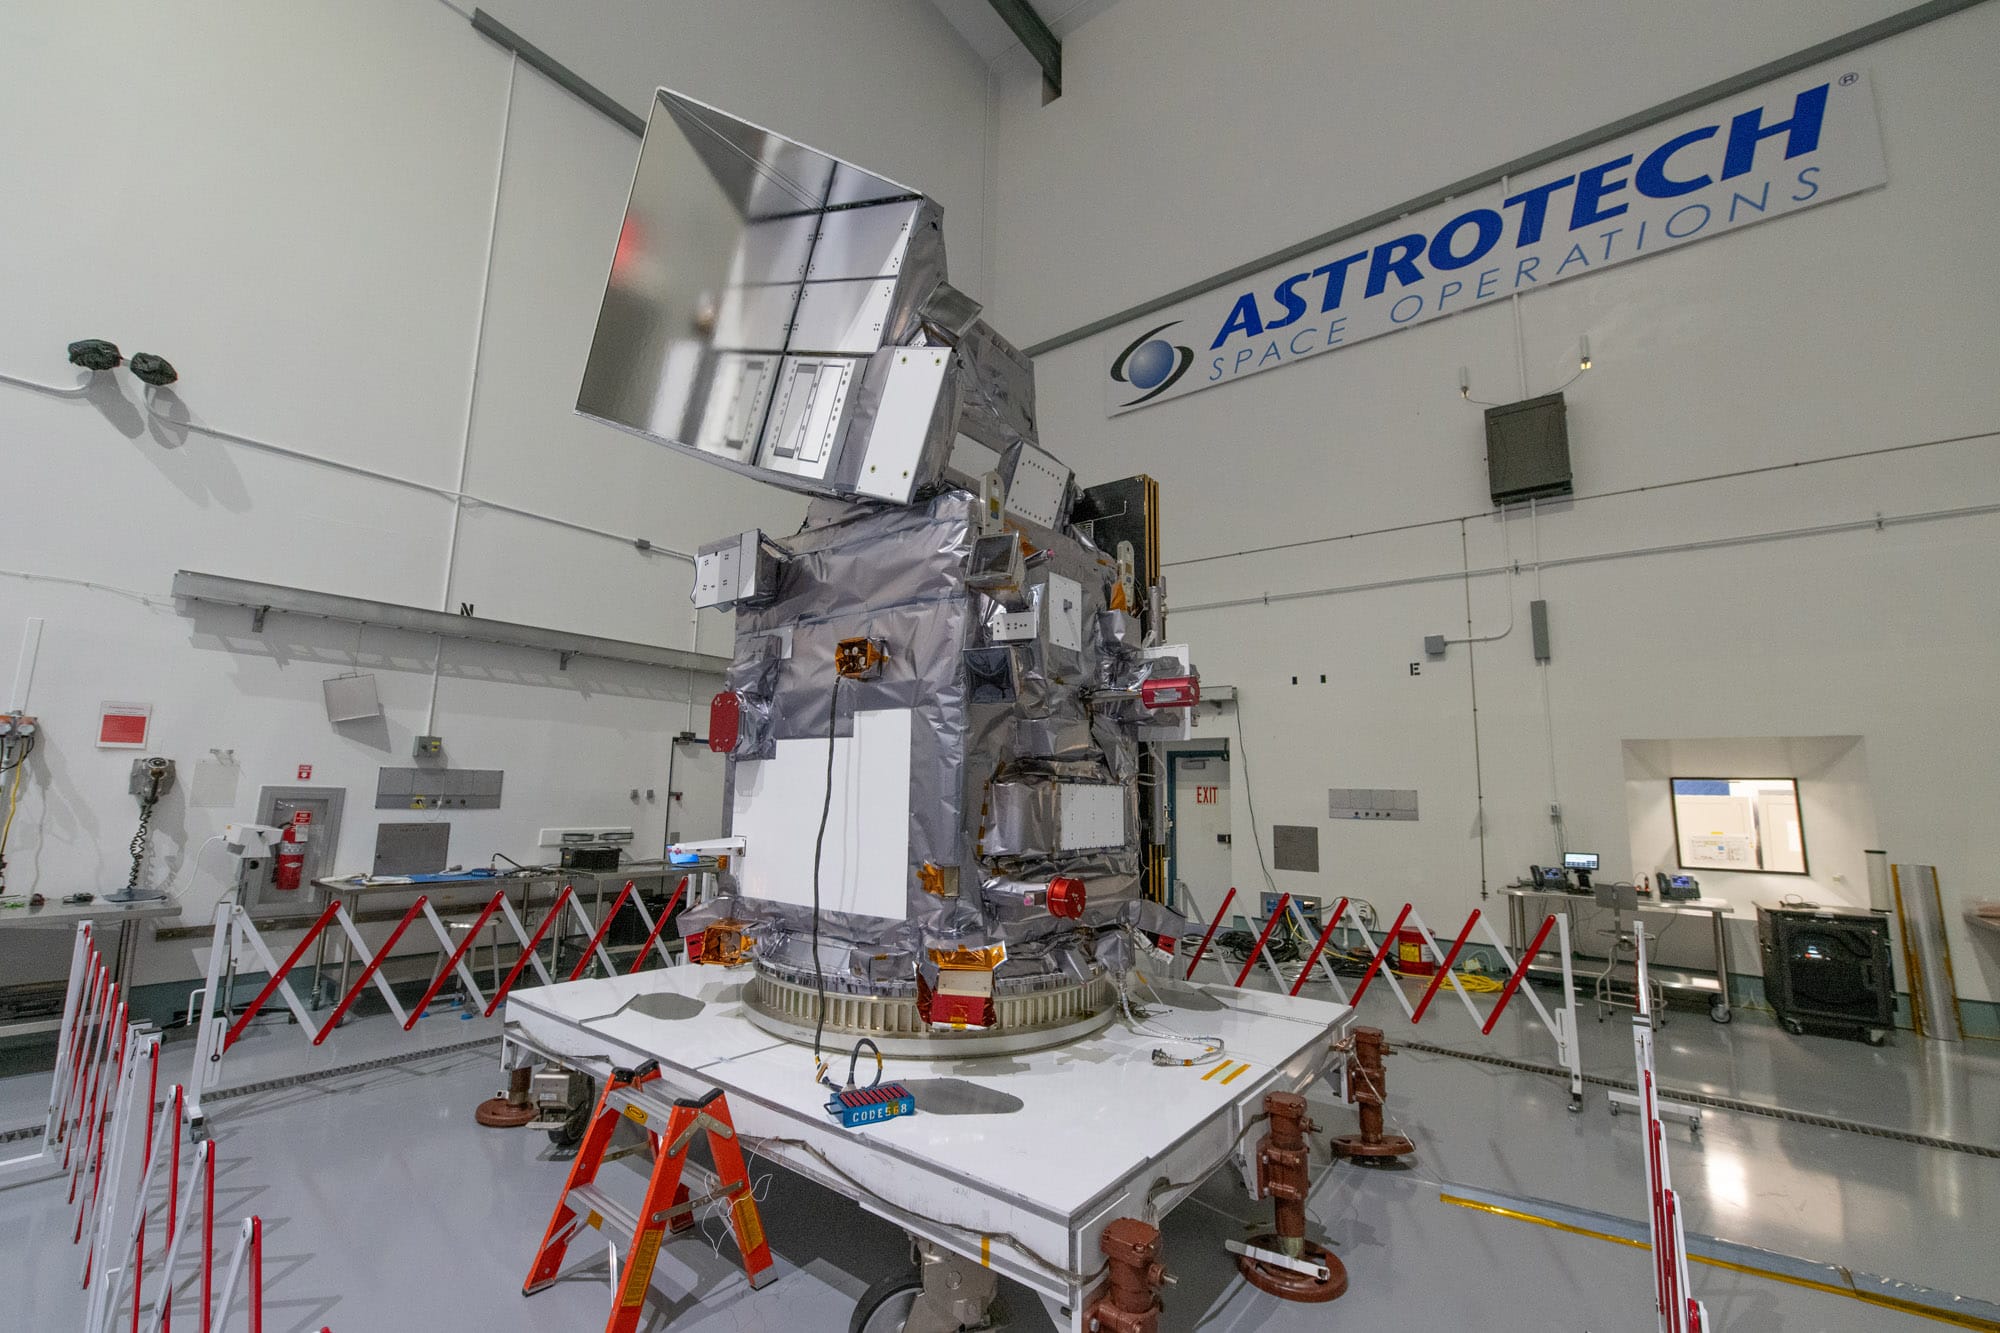 PACE Observatory at Astrotech prior to encapsulation in its payload fairing. ©NASA